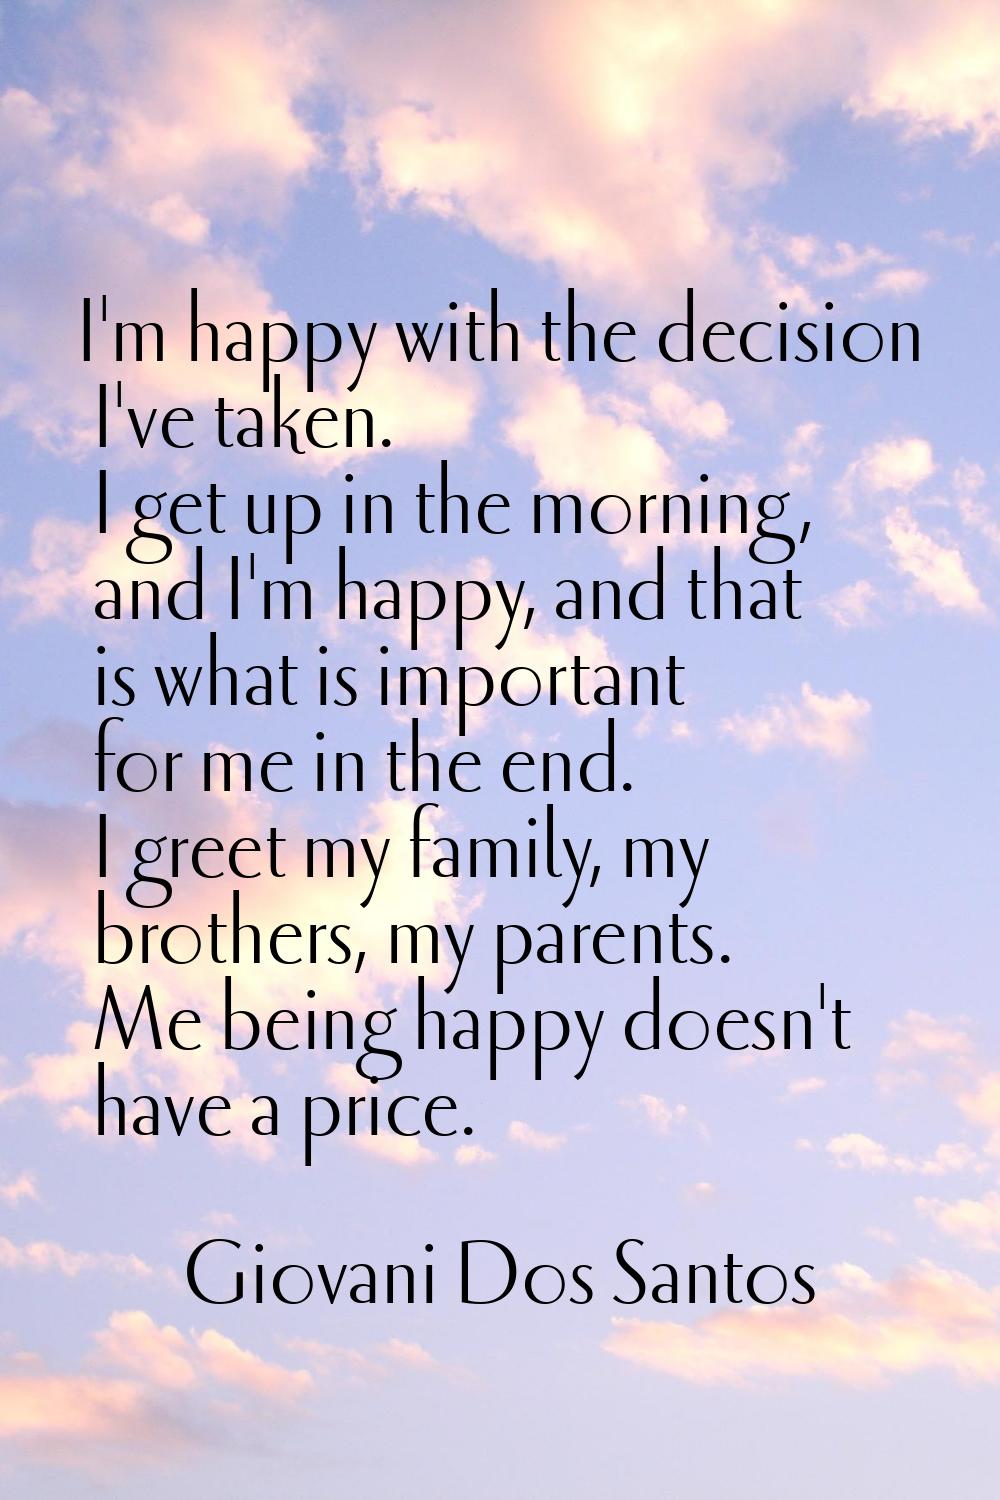 I'm happy with the decision I've taken. I get up in the morning, and I'm happy, and that is what is